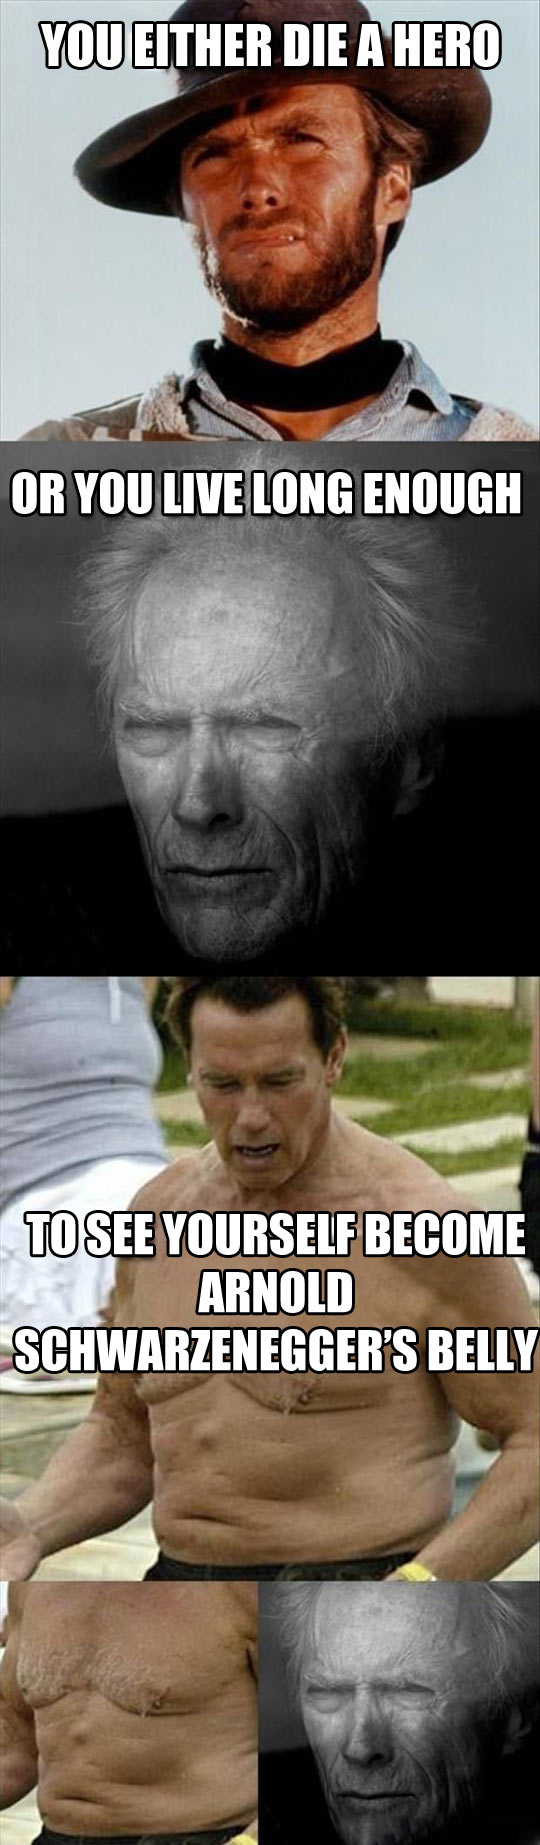 Clint Eastwood’s unfortunate luck…